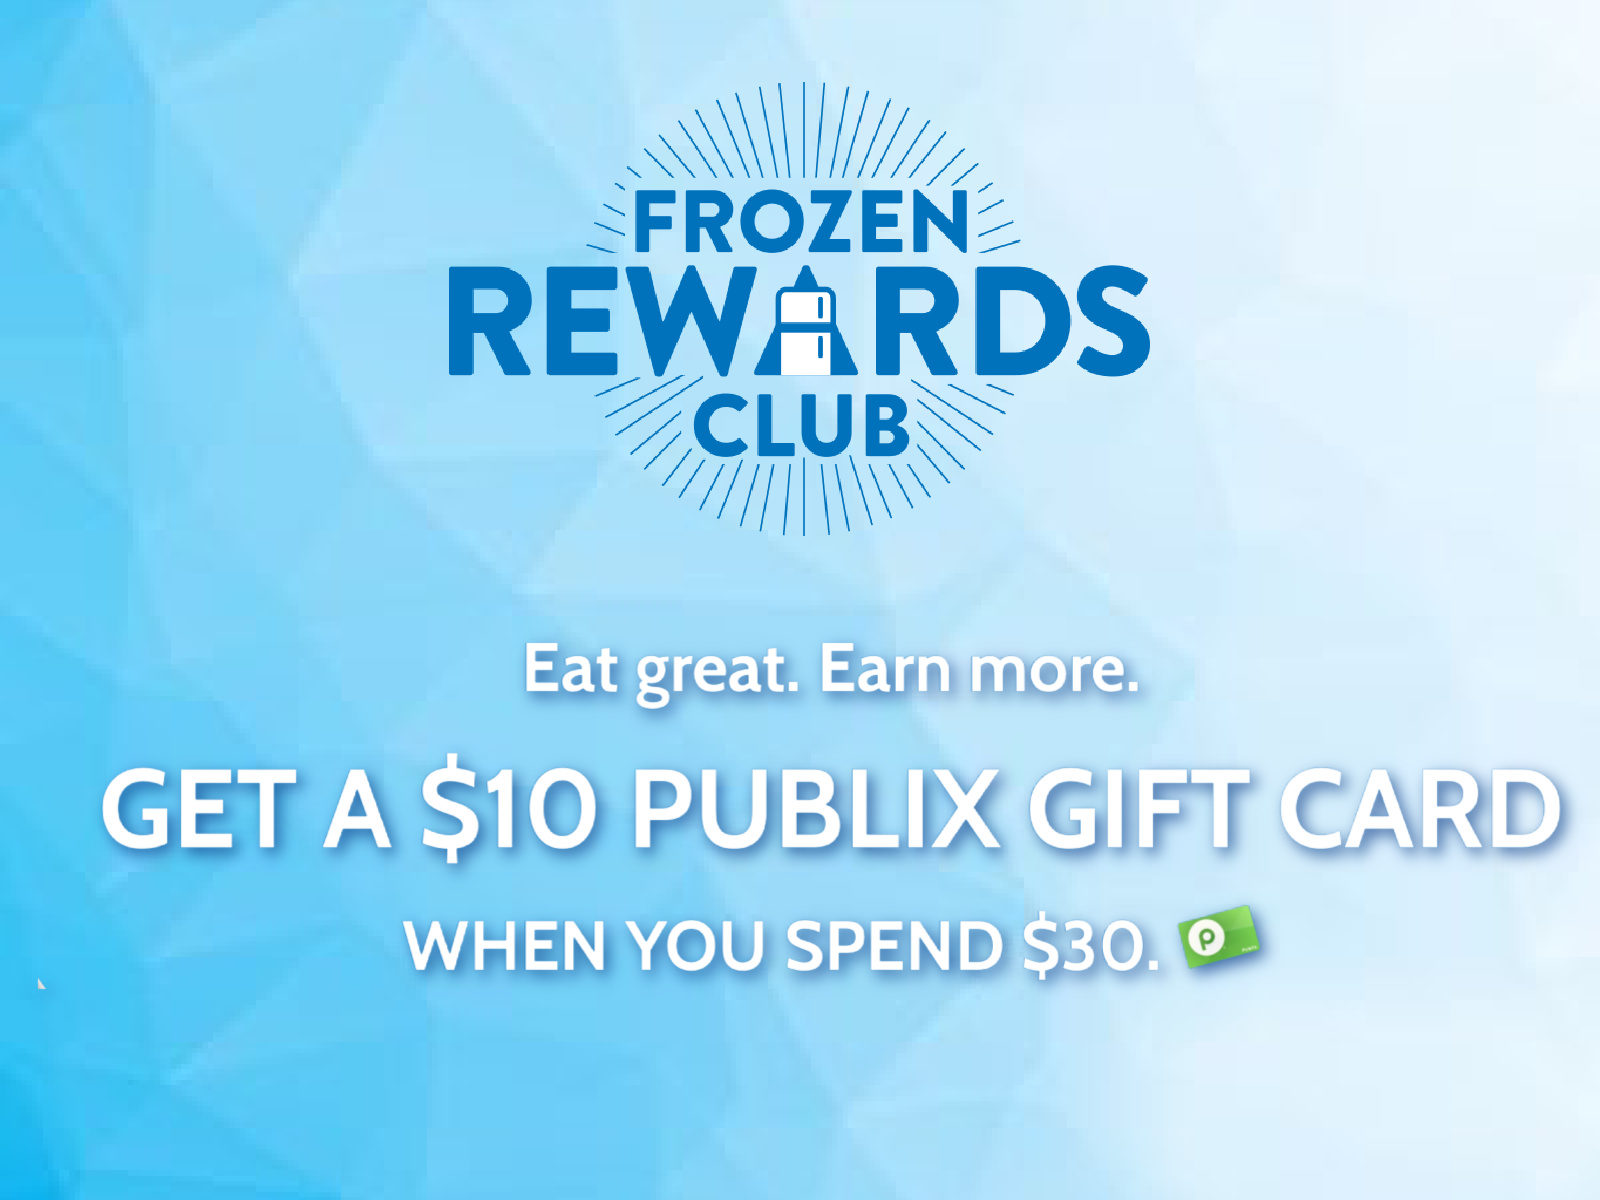 The Frozen Rewards Club Is Back For 2022 - Start Earning Up To $50 In Publix Gift Cards! on I Heart Publix 2